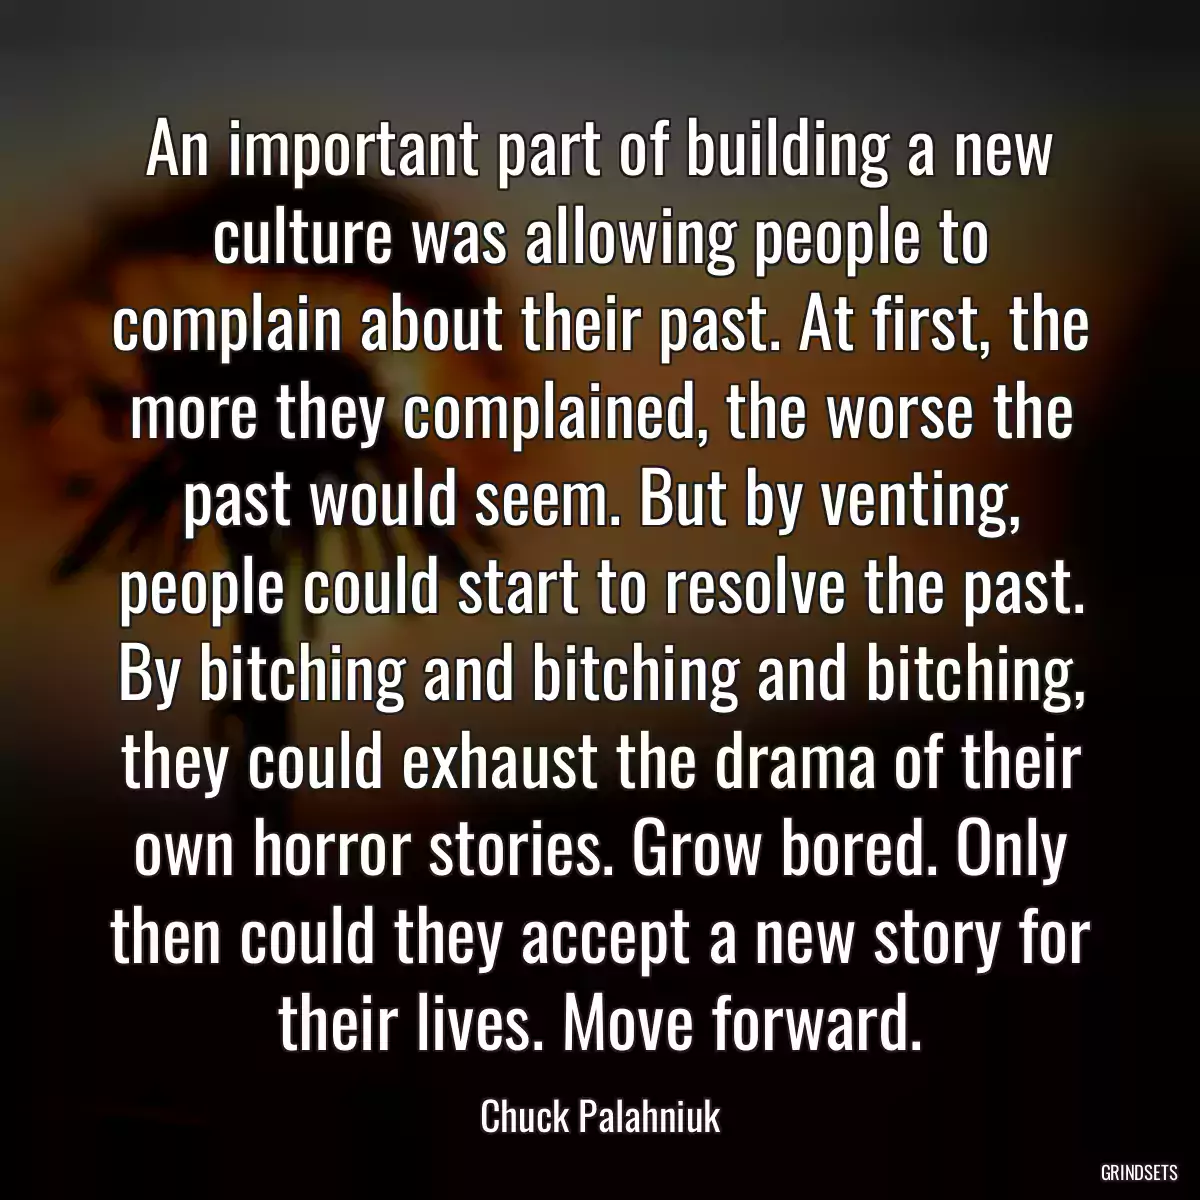 An important part of building a new culture was allowing people to complain about their past. At first, the more they complained, the worse the past would seem. But by venting, people could start to resolve the past. By bitching and bitching and bitching, they could exhaust the drama of their own horror stories. Grow bored. Only then could they accept a new story for their lives. Move forward.